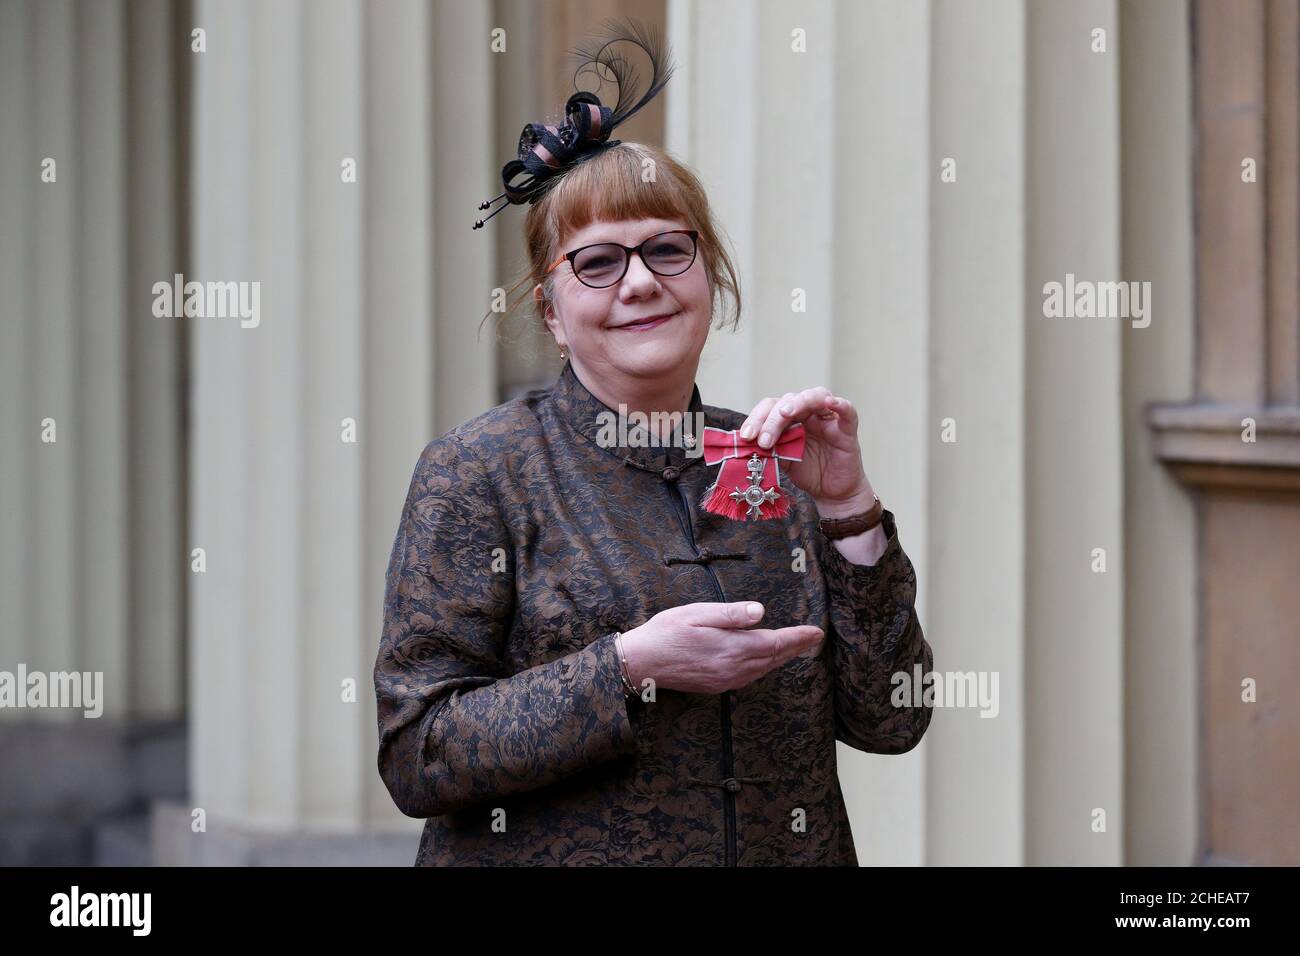 Rosemary Johnson, former Executive Director of the Royal Philharmonic Society, was made an MBE (Member of the Order of the British Empire) in an Investiture ceremony at Buckingham Palace, London. Stock Photo